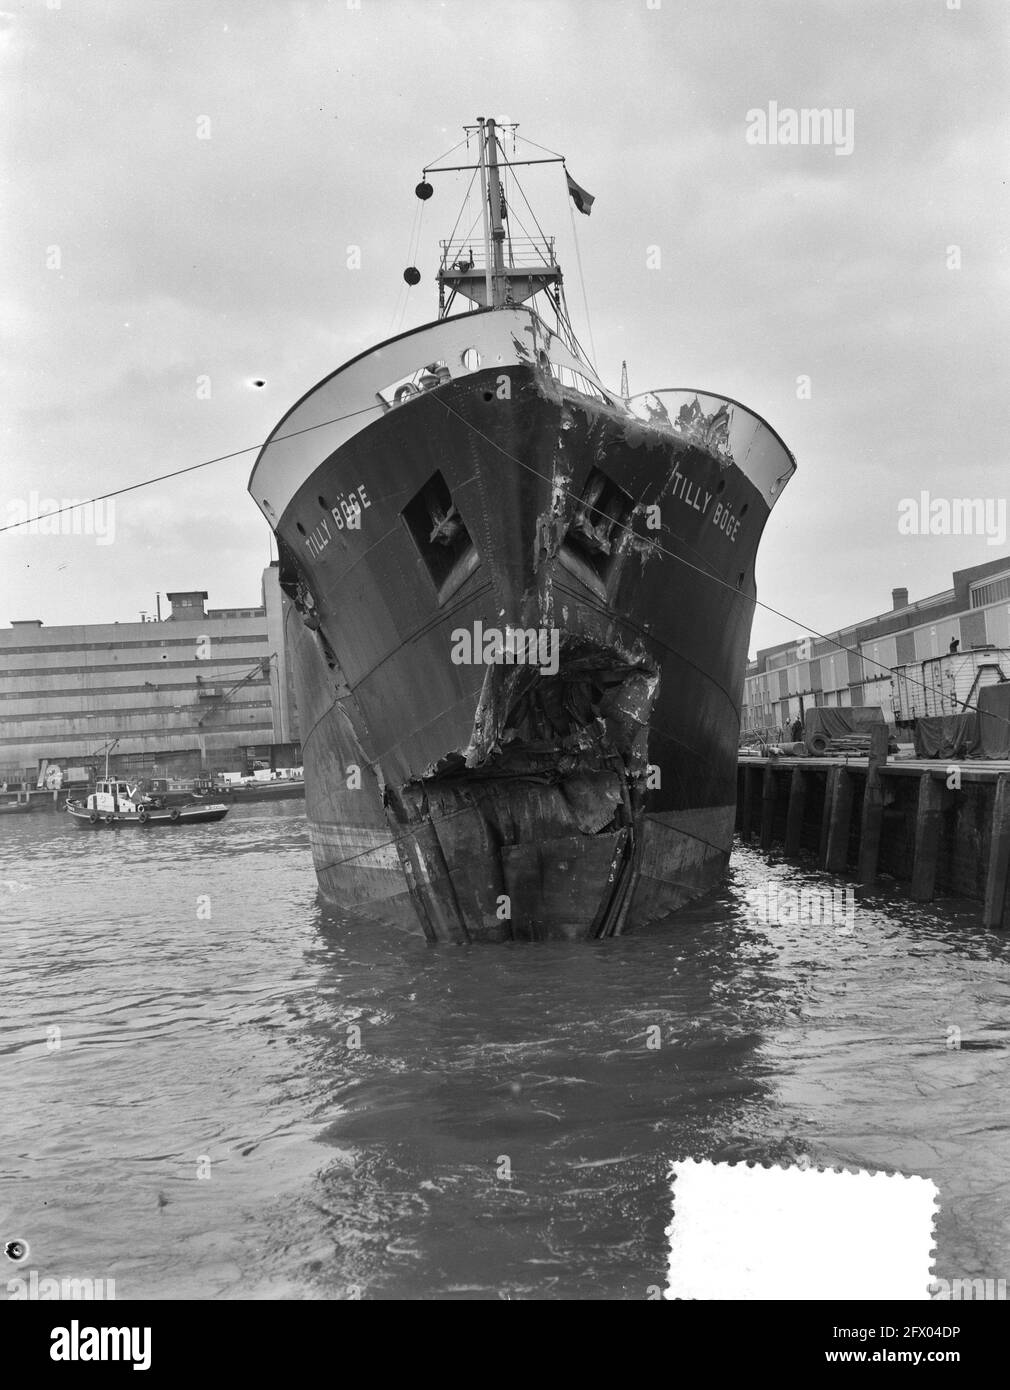 Nov. 11, 1954 - Eight trapped in wrecked Lightship. Man Stands on side of  vessel.: Eight men are reported to be trapped in the hull of South Goodwin Lightship  wrecked on the